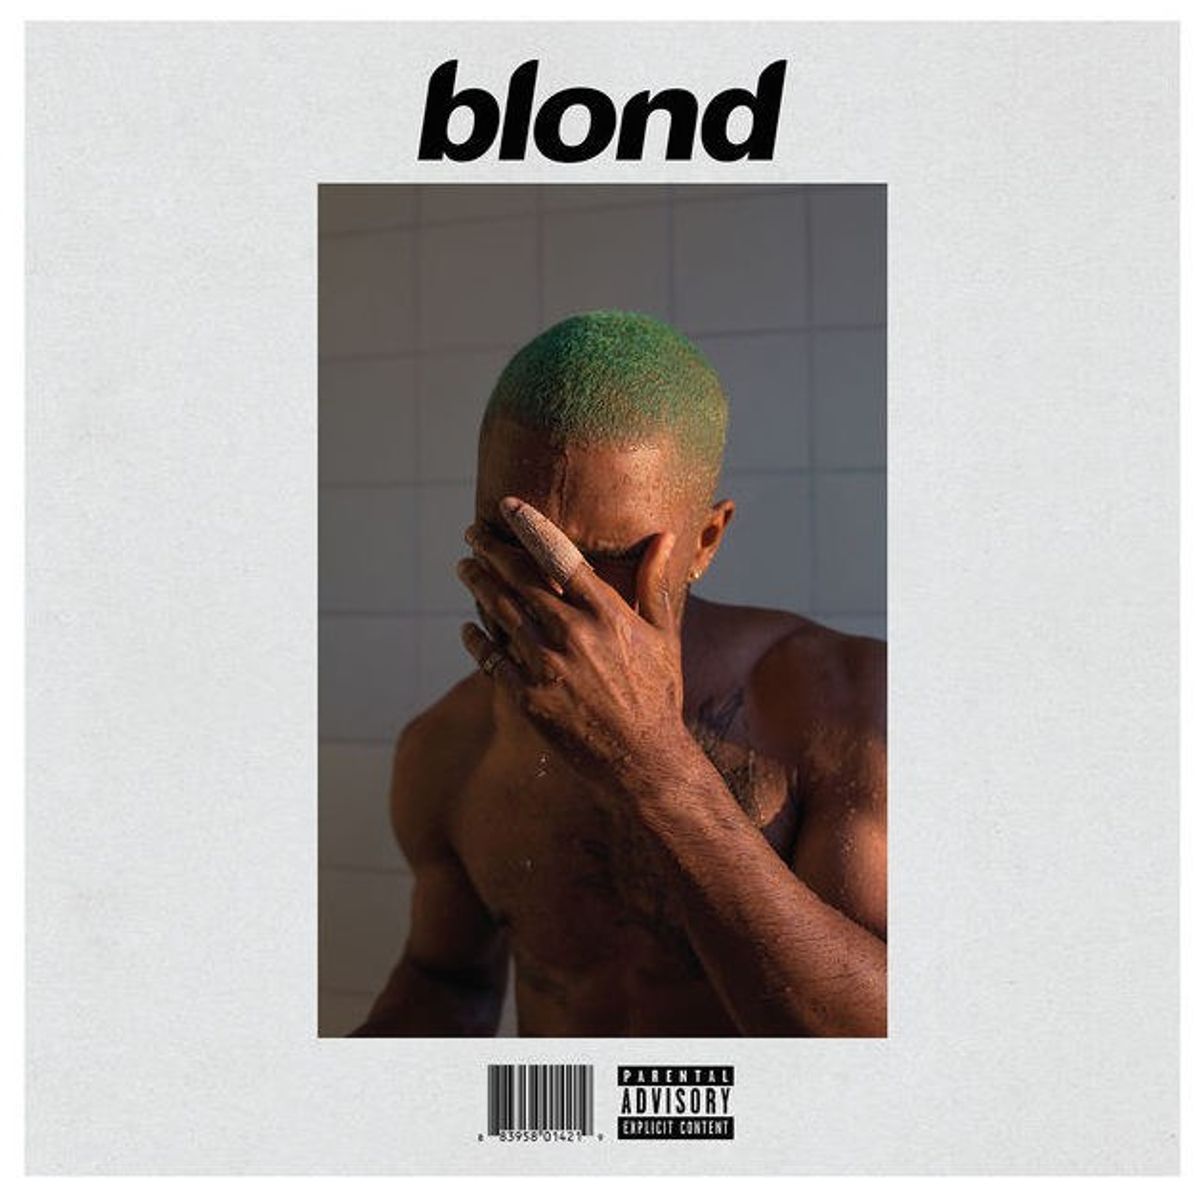 First Impressions Of Frank Ocean's New Album